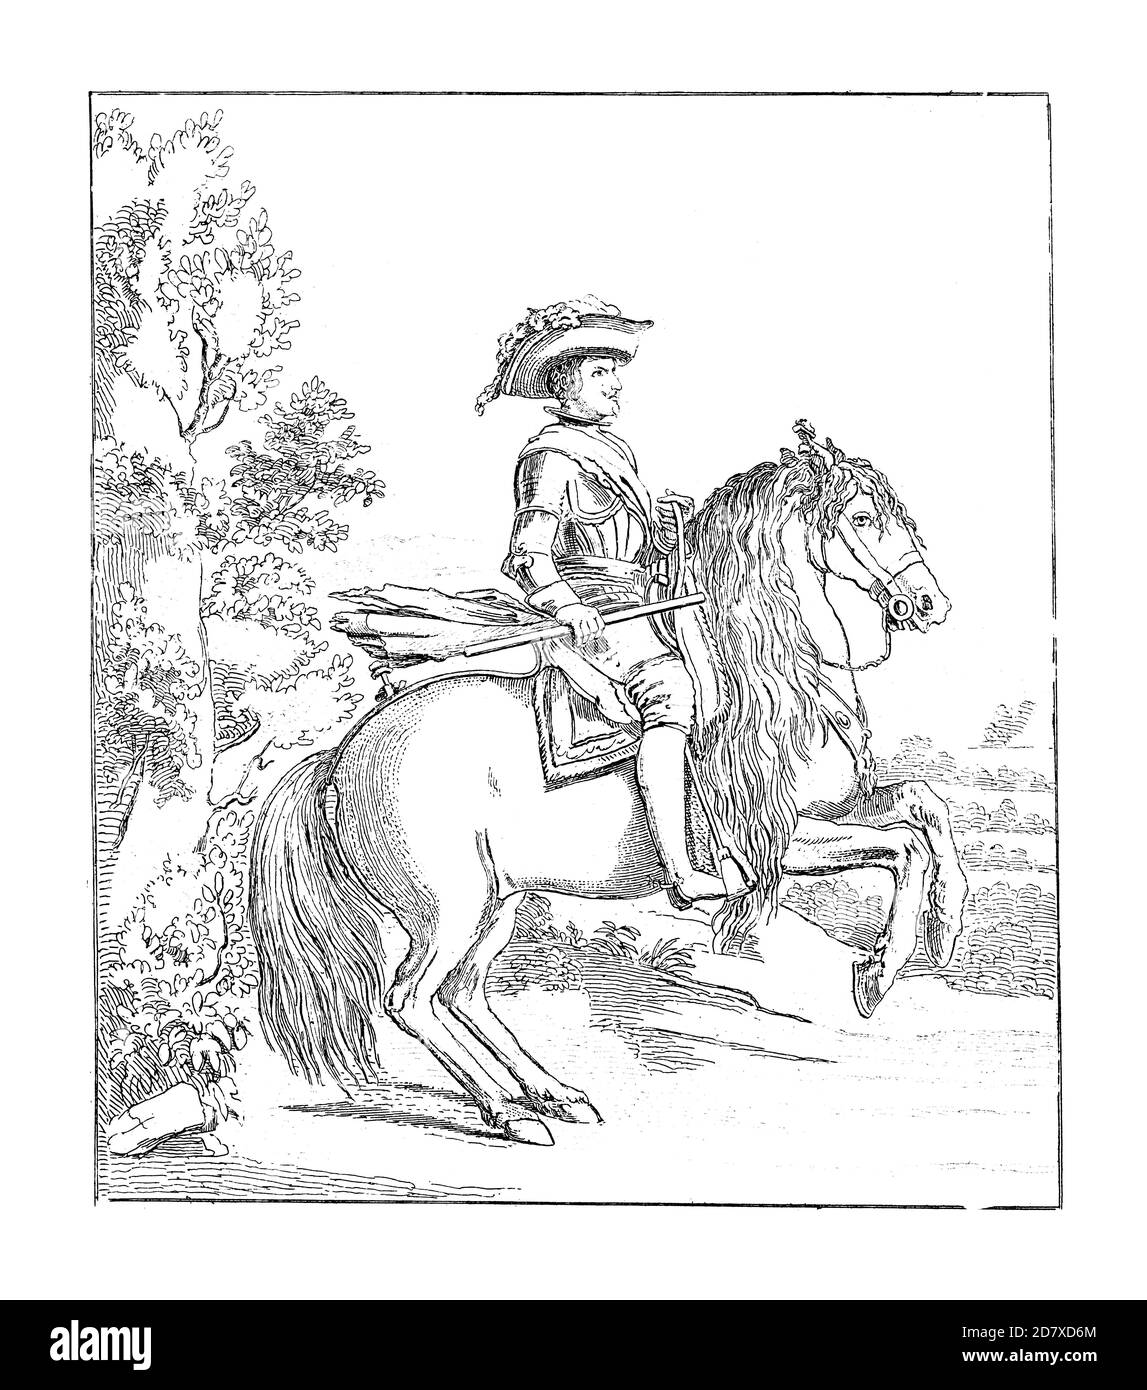 19th-century illustration depicting Philip IV on Horseback, painting by Diego Velazquez (dated 1636). He was born on June 6, 1599 in Seville, Spain an Stock Photo